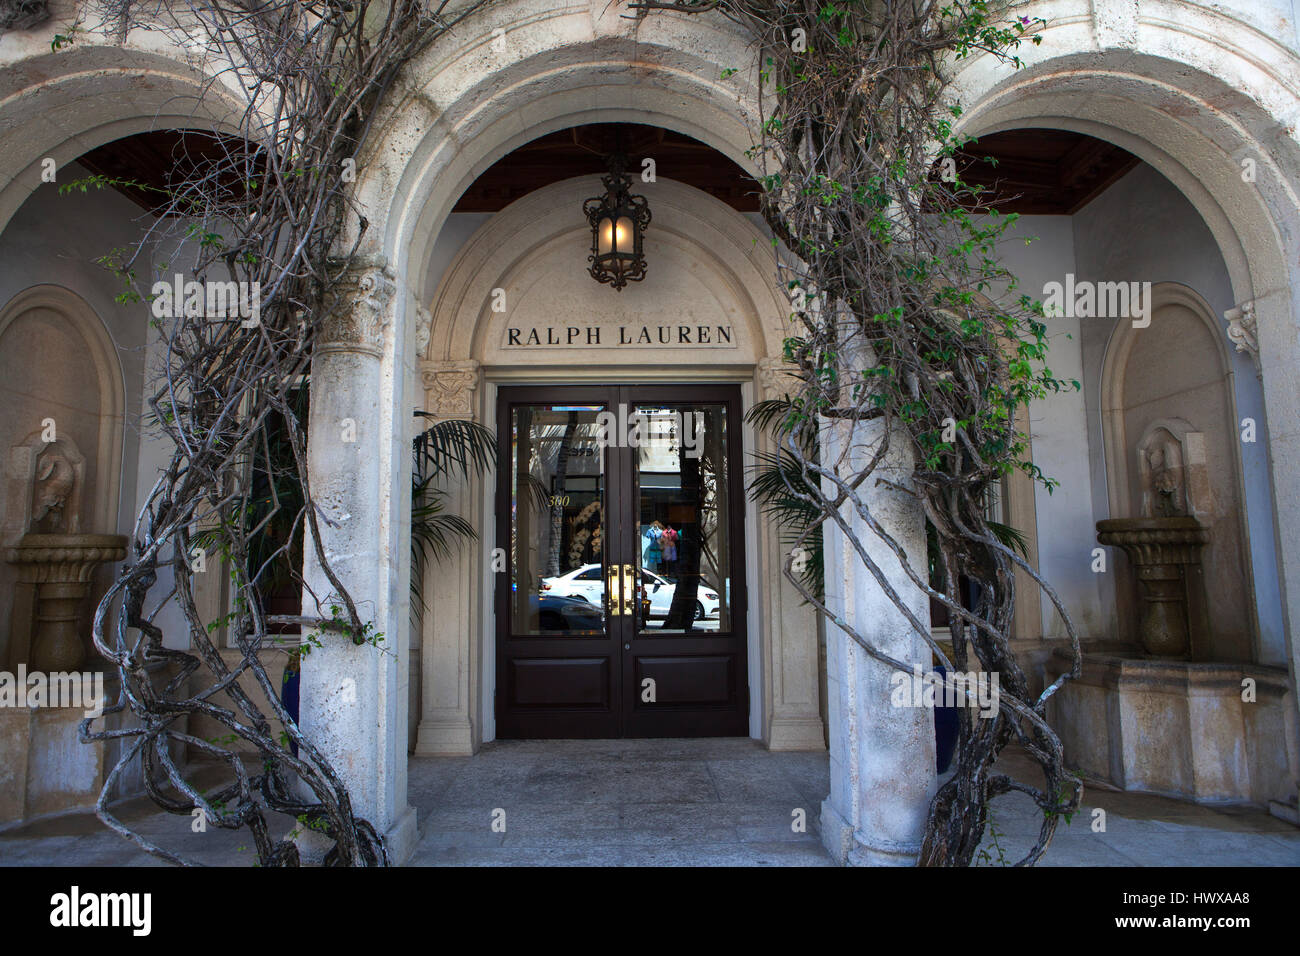 Ralph Lauren store. Worth Avenue, in Palm Beach, is one of the